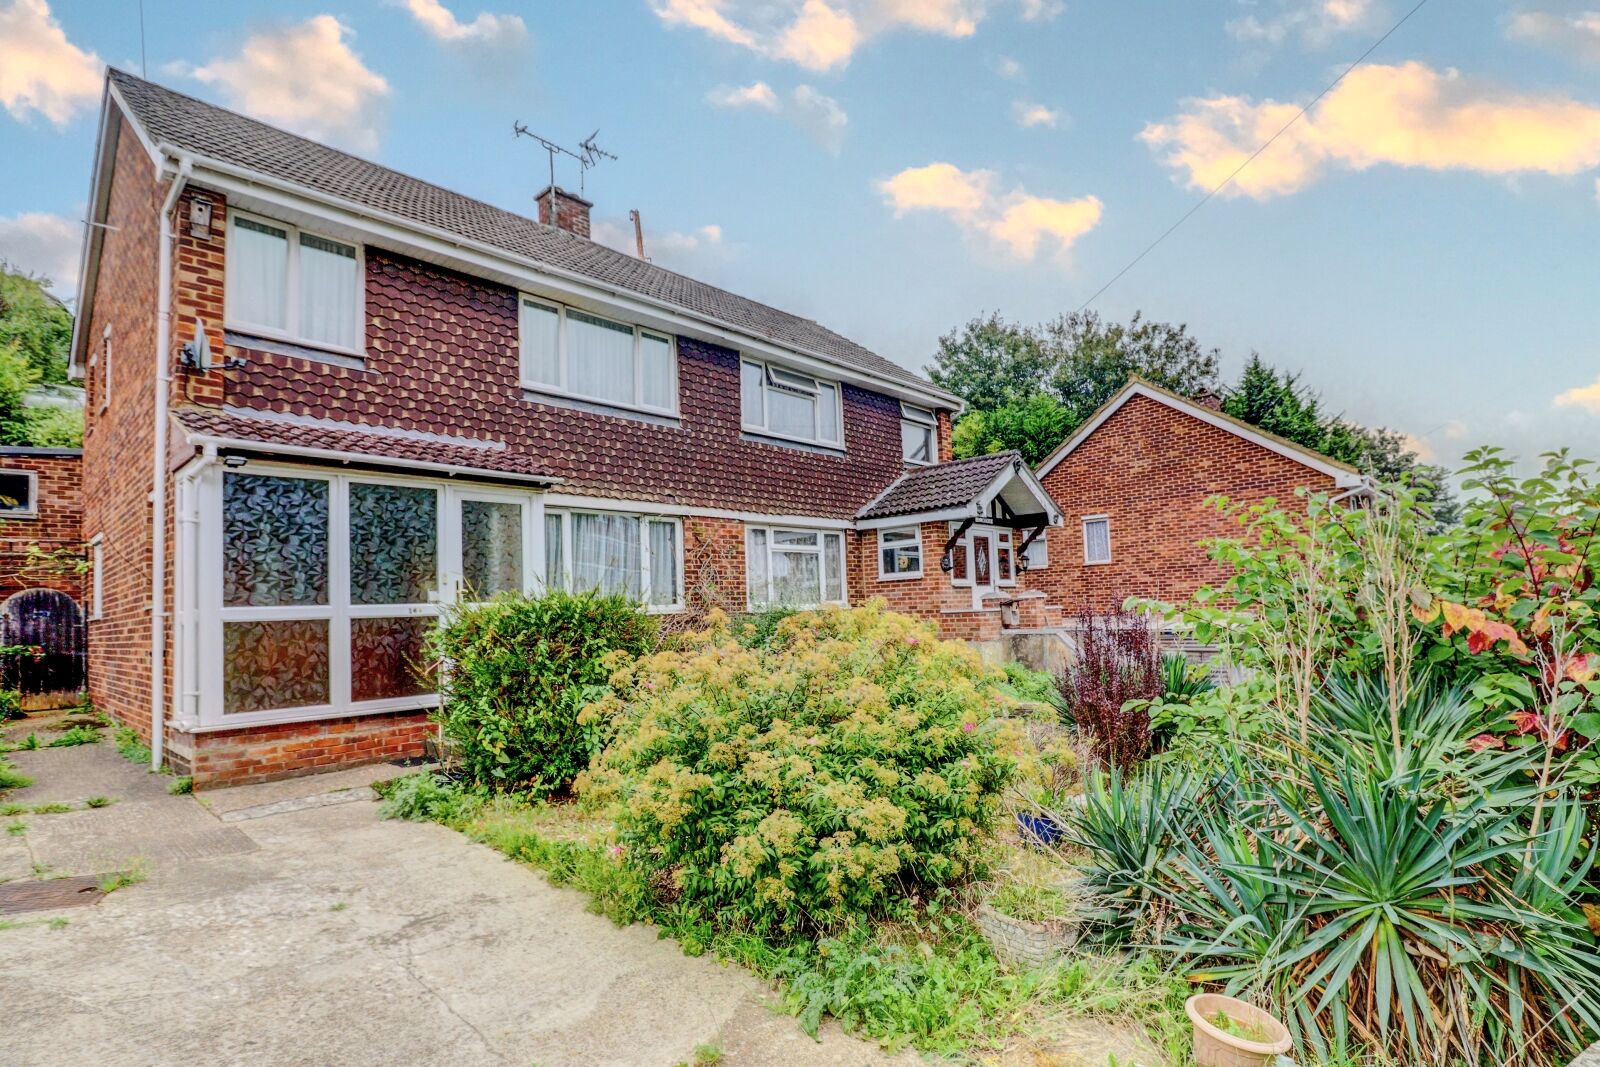 3 bedroom semi detached house for sale Hicks Farm Rise, High Wycombe, HP13, main image